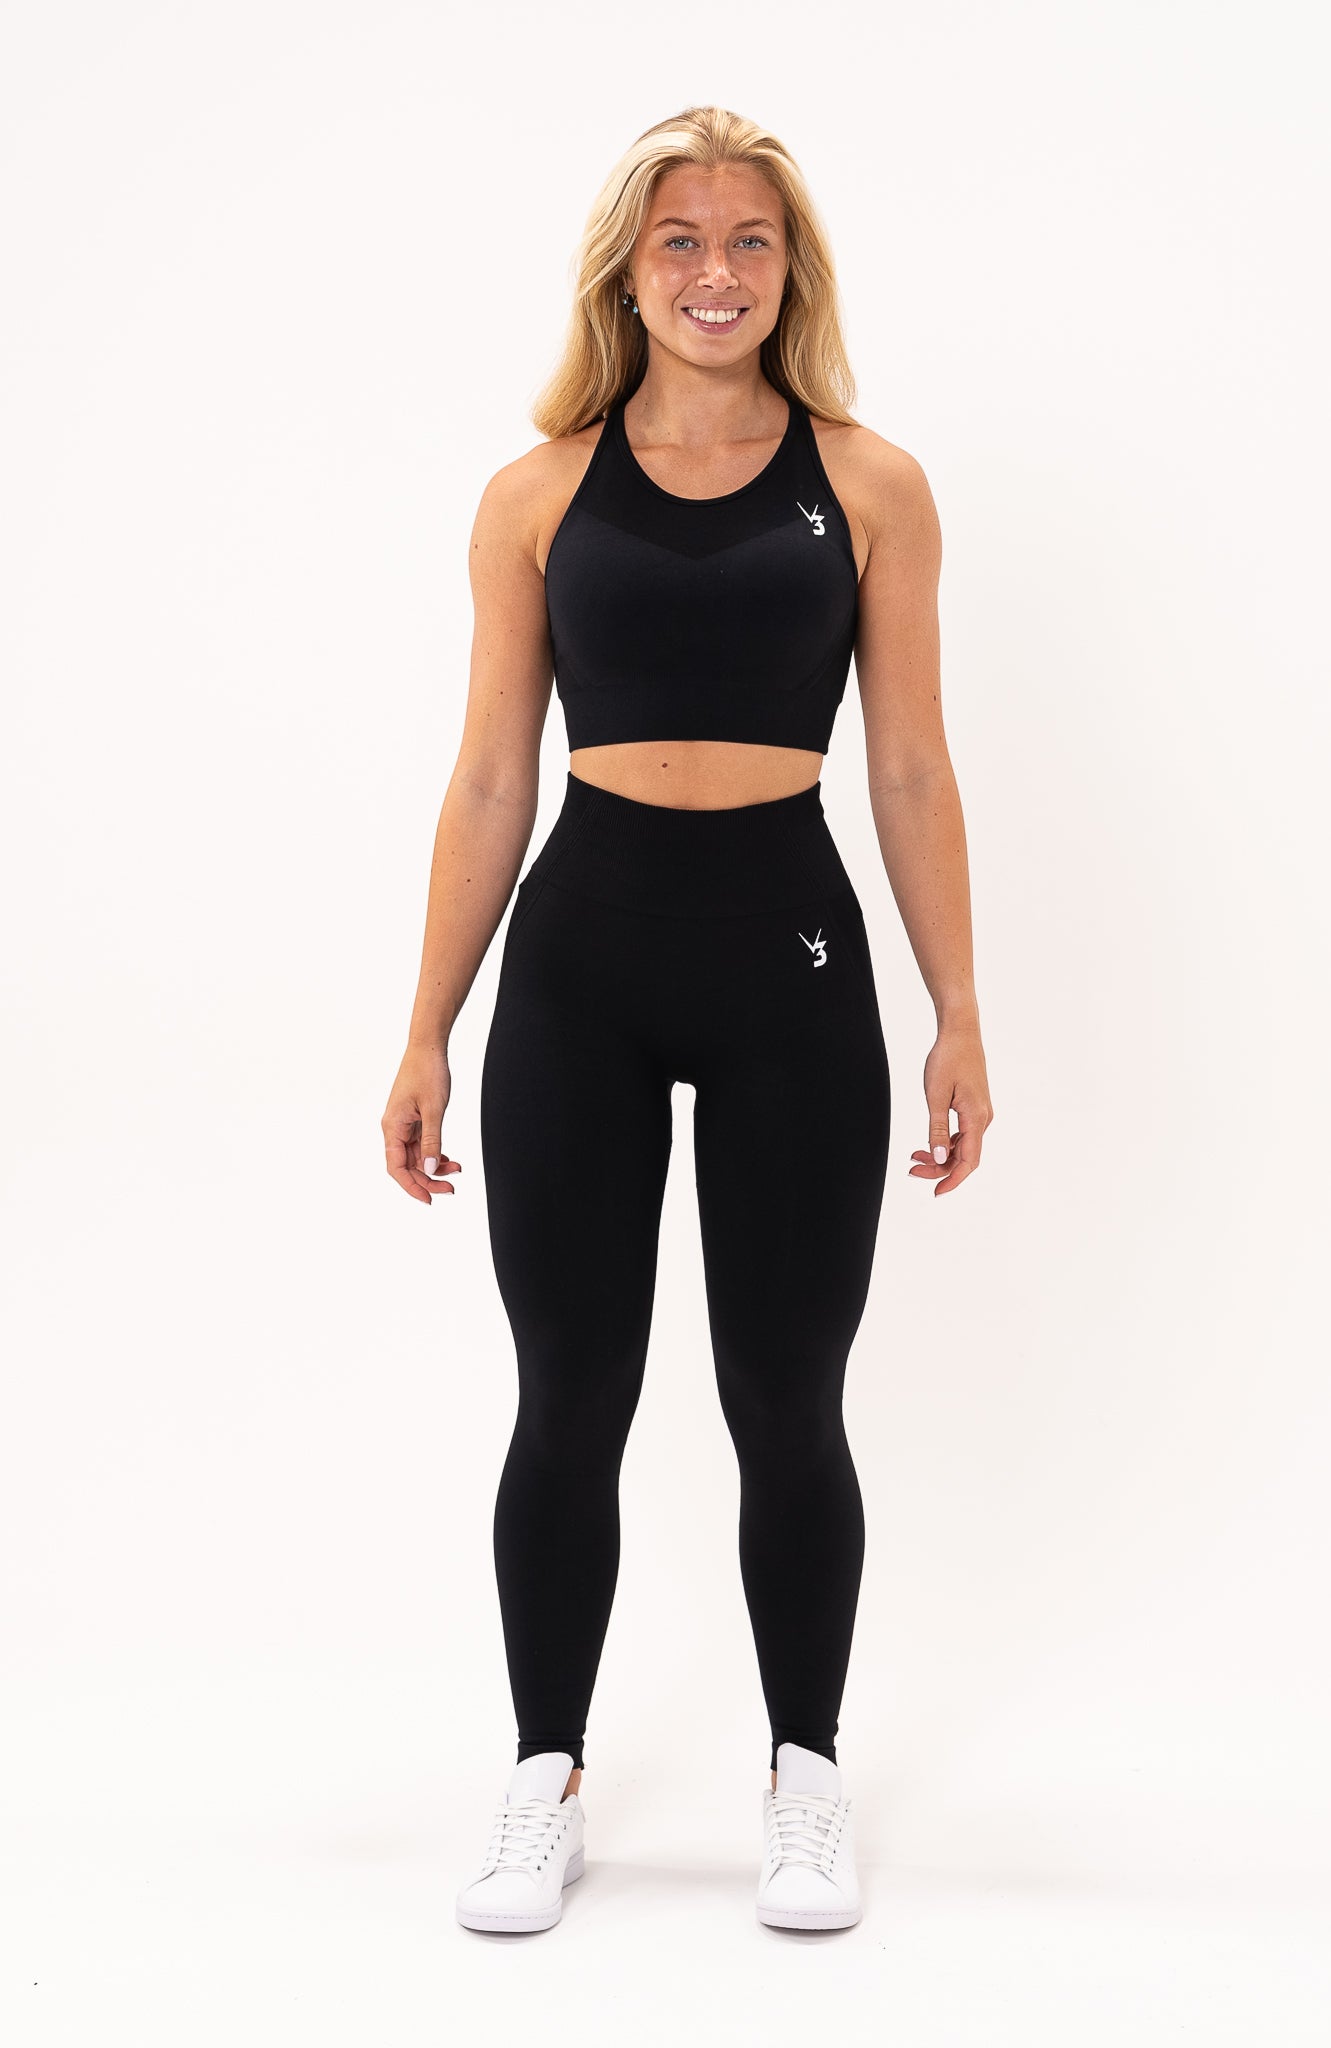 V3 Apparel Women's Tempo seamless scrunch bum shaping high waisted leggings and training sports bra in black – Squat proof sports tights and training bra for Gym workouts training, Running, yoga, bodybuilding and bikini fitness.